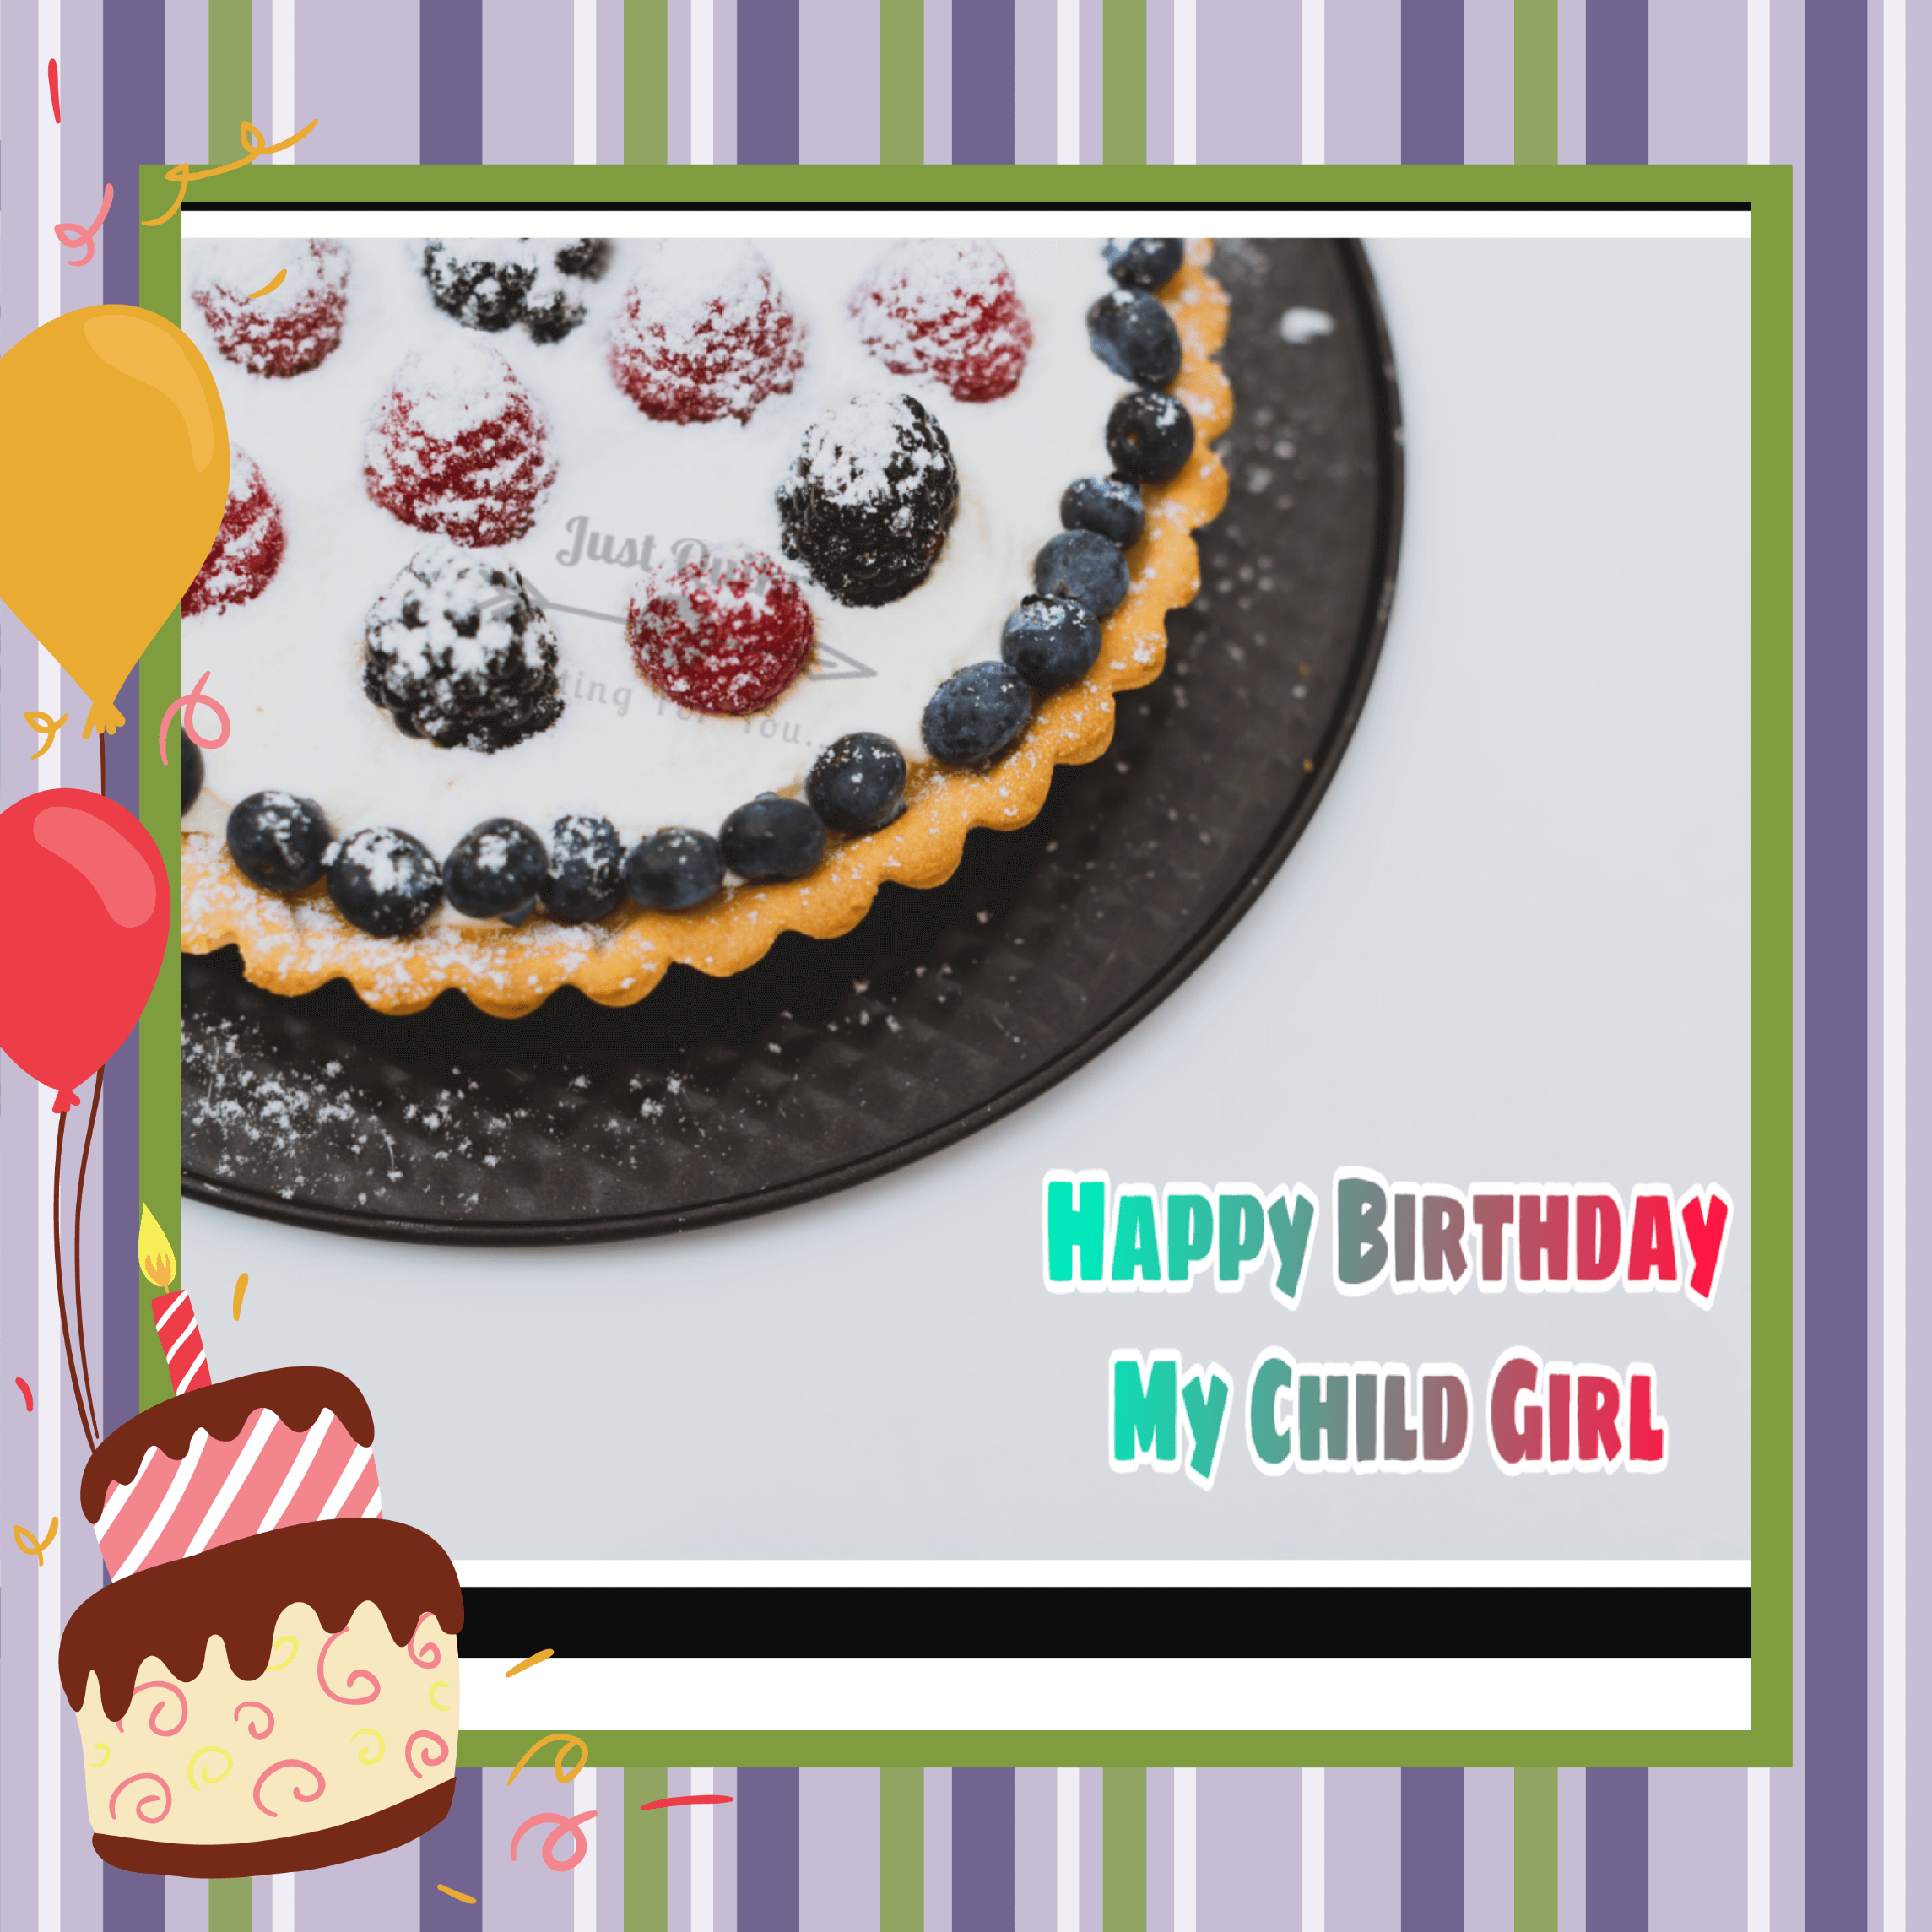 Special Unique Happy Birthday Cake HD Pics Images for Child Girl